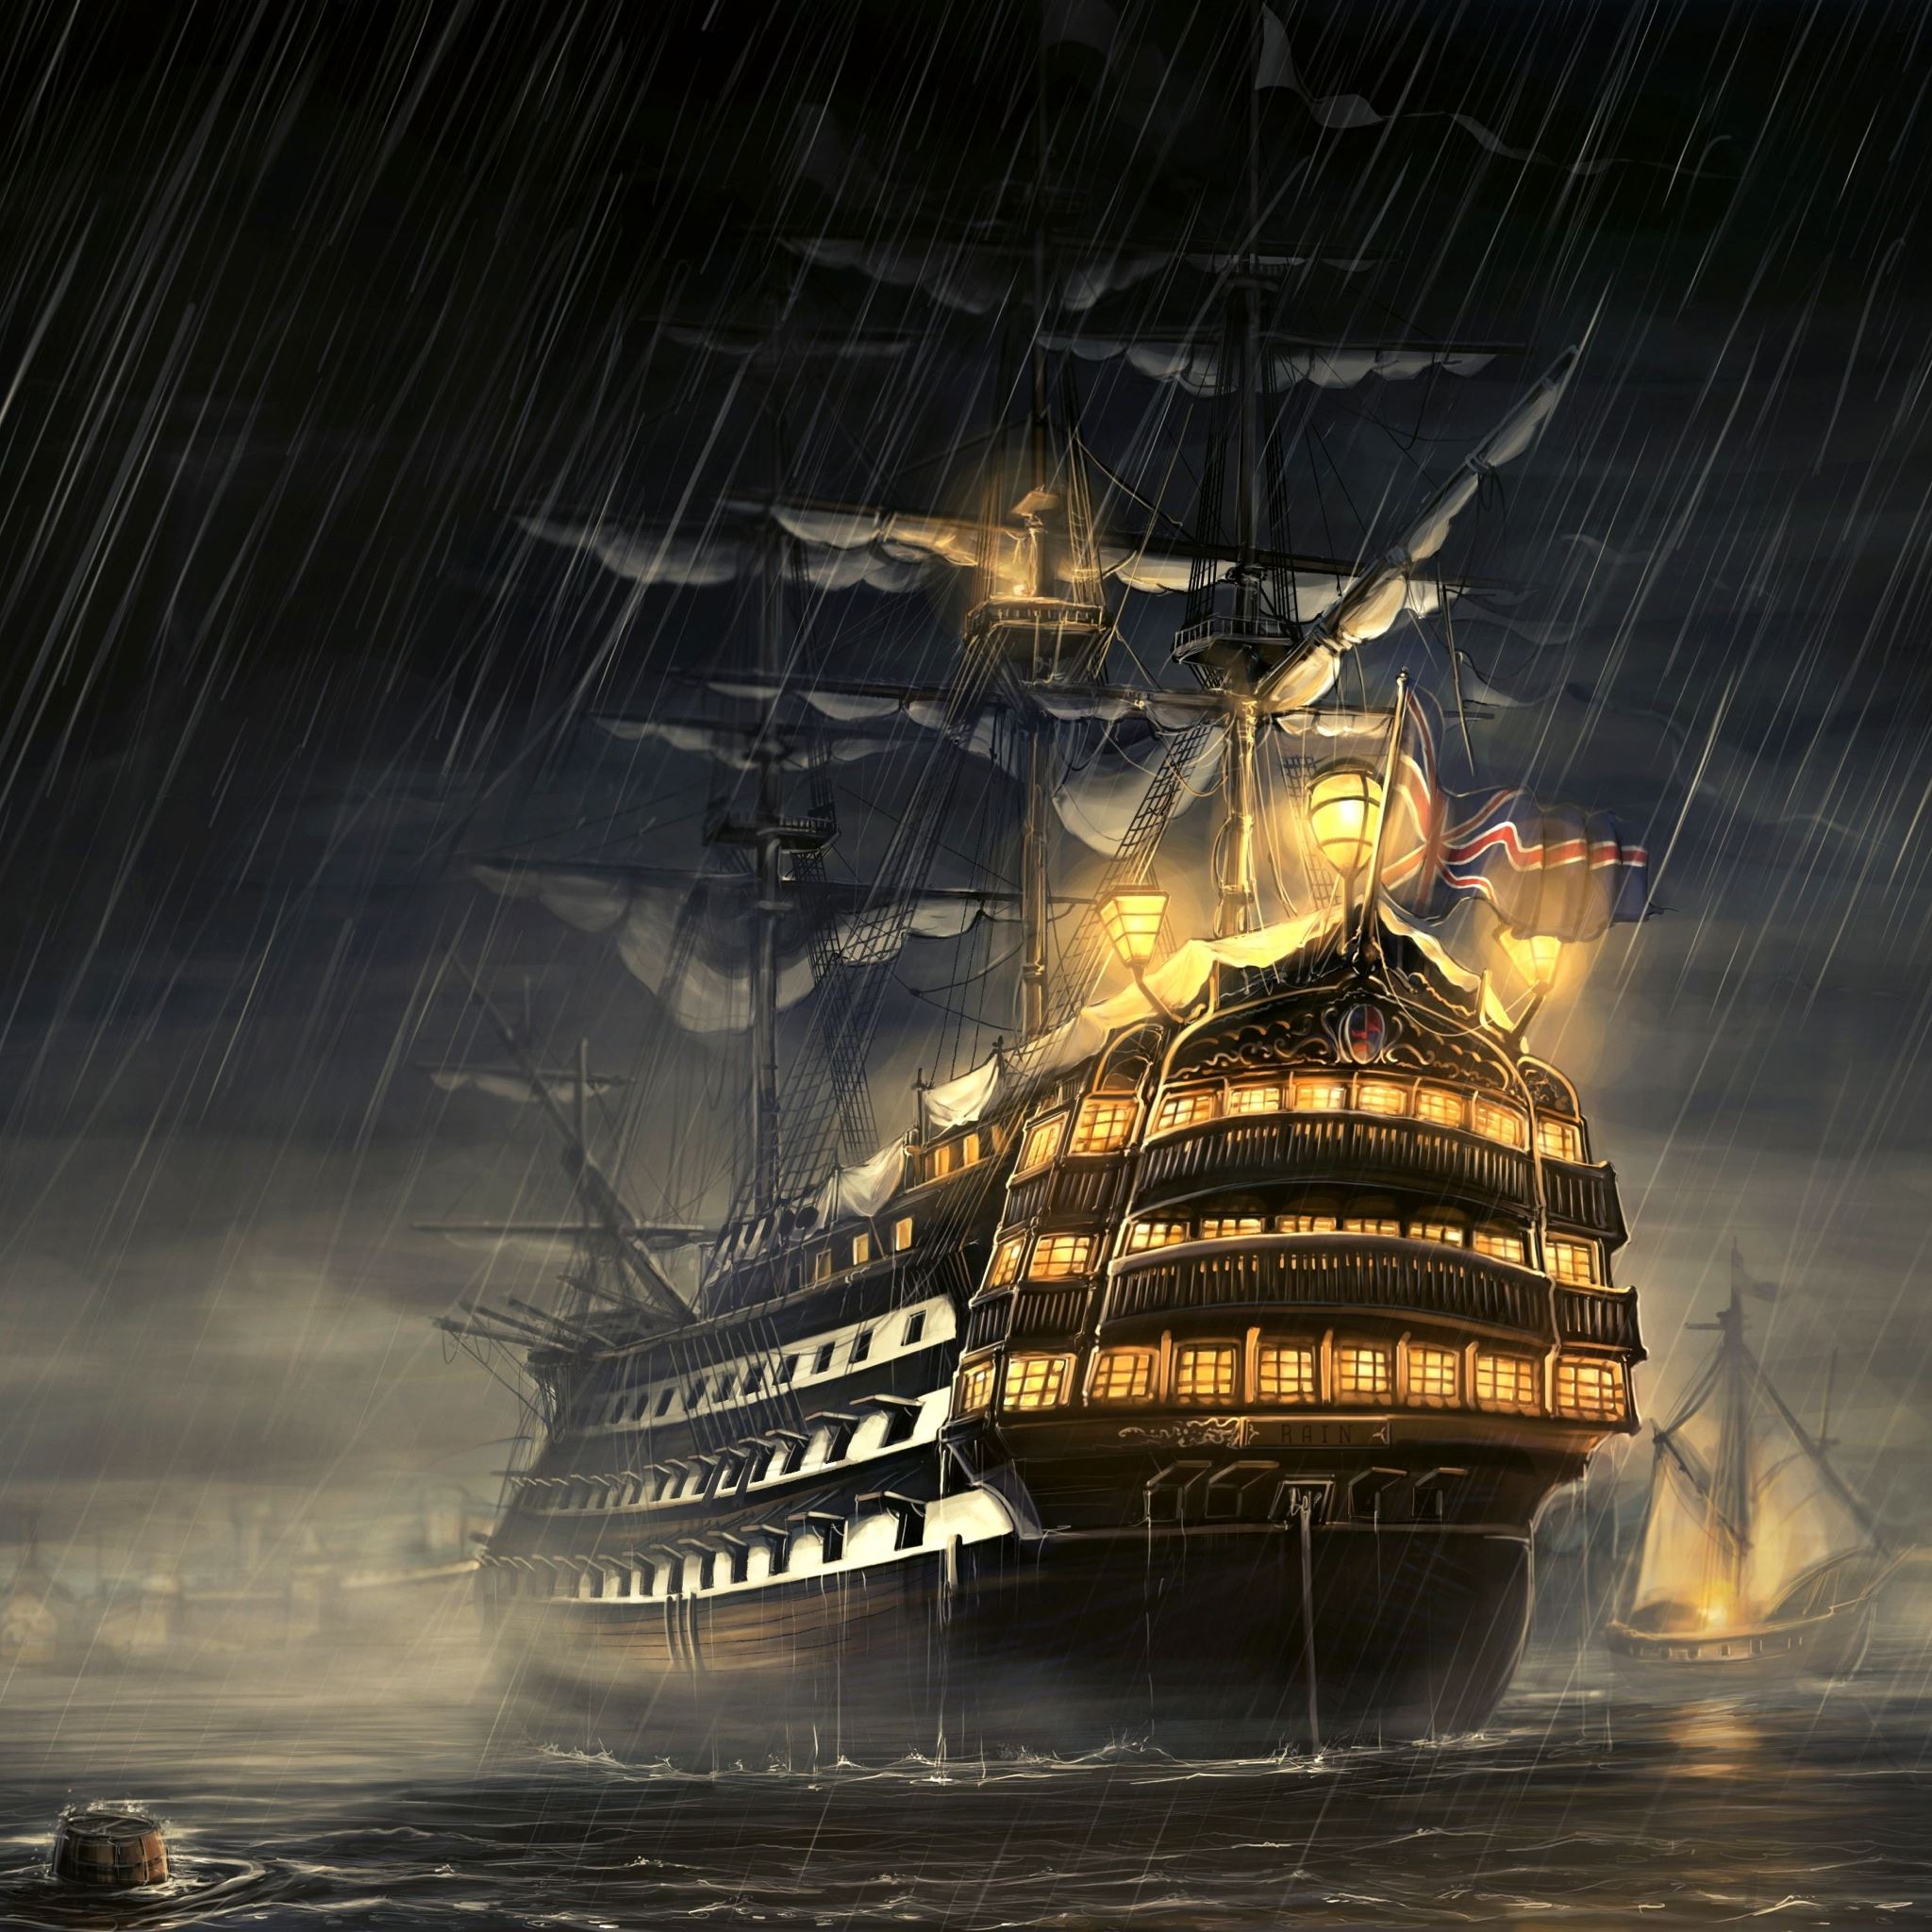 Pirate ship ipad air wallpapers free download